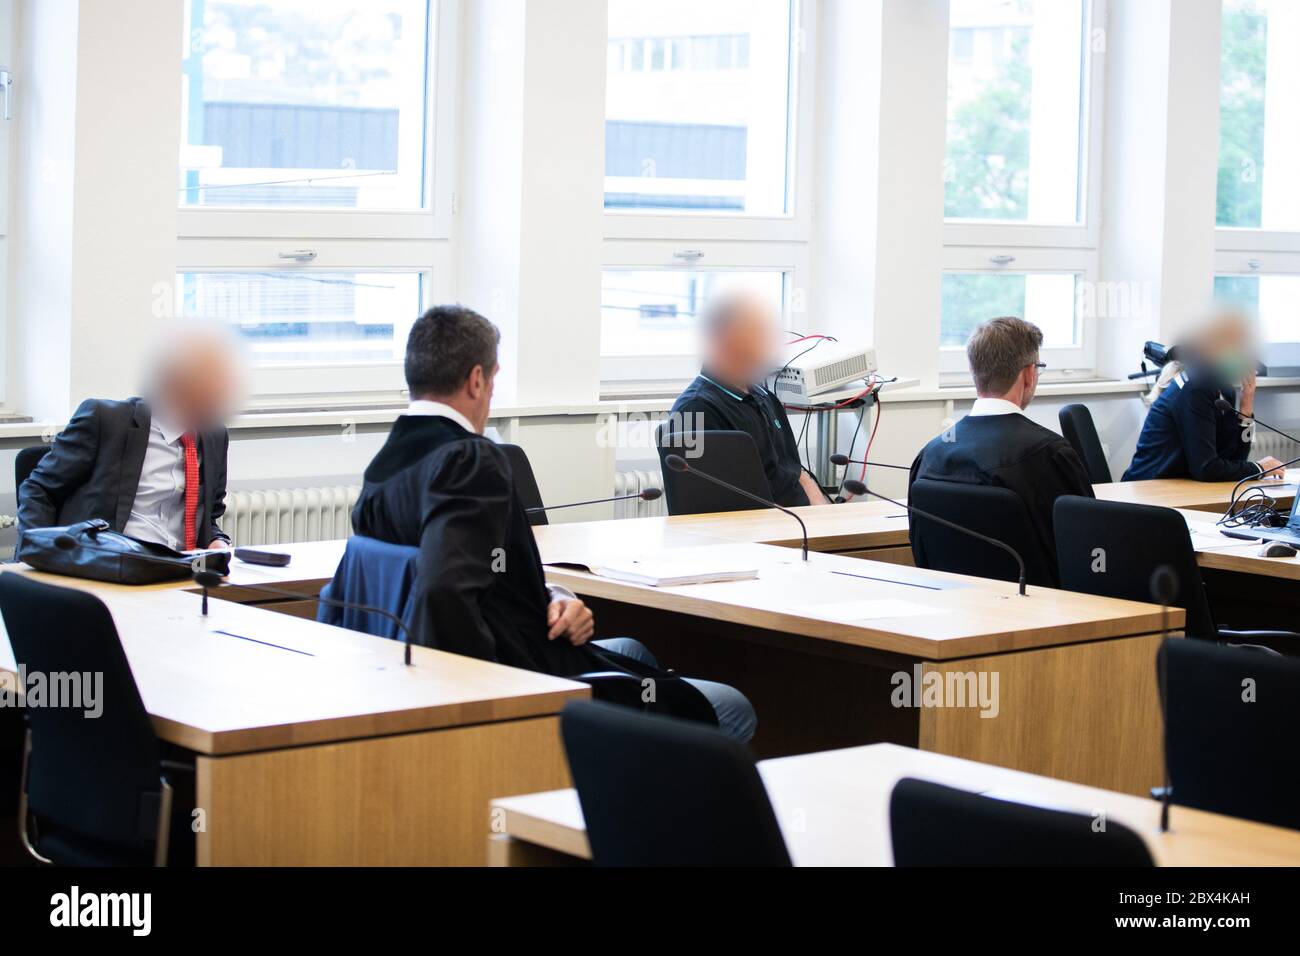 05 June 2020, Baden-Wuerttemberg, Stuttgart: The three defendants (back row) sit next to their lawyers in the courtroom at the beginning of the trial. With allegedly lucrative gold trading deals, a woman and two men are said to have robbed investors of two million euros. The trial is scheduled for the end of September. Photo: Tom Weller/dpa - ATTENTION: Person(s) has (have) been pixelated for legal reasons Stock Photo